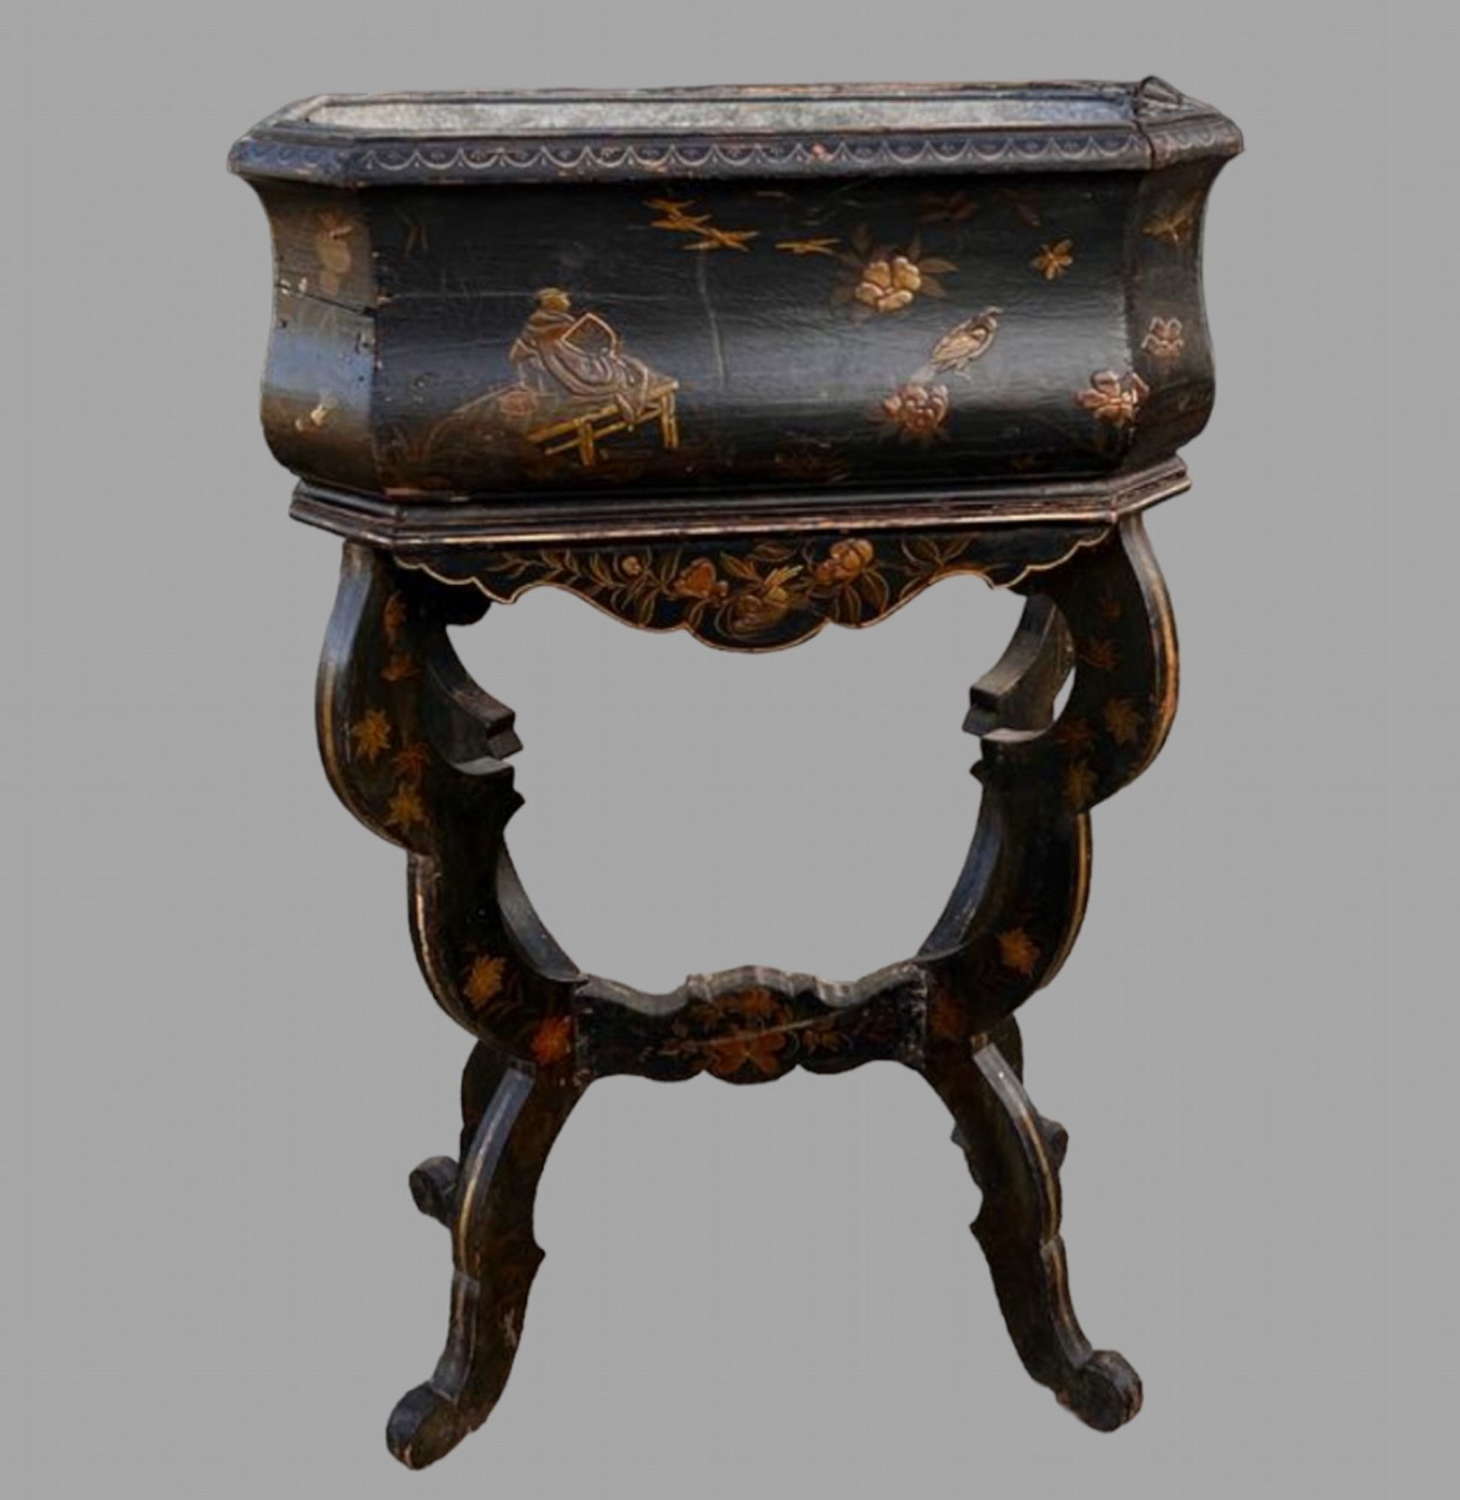 A 19thc Chinoiserie Style Lacquered Planter with Zinc Liner